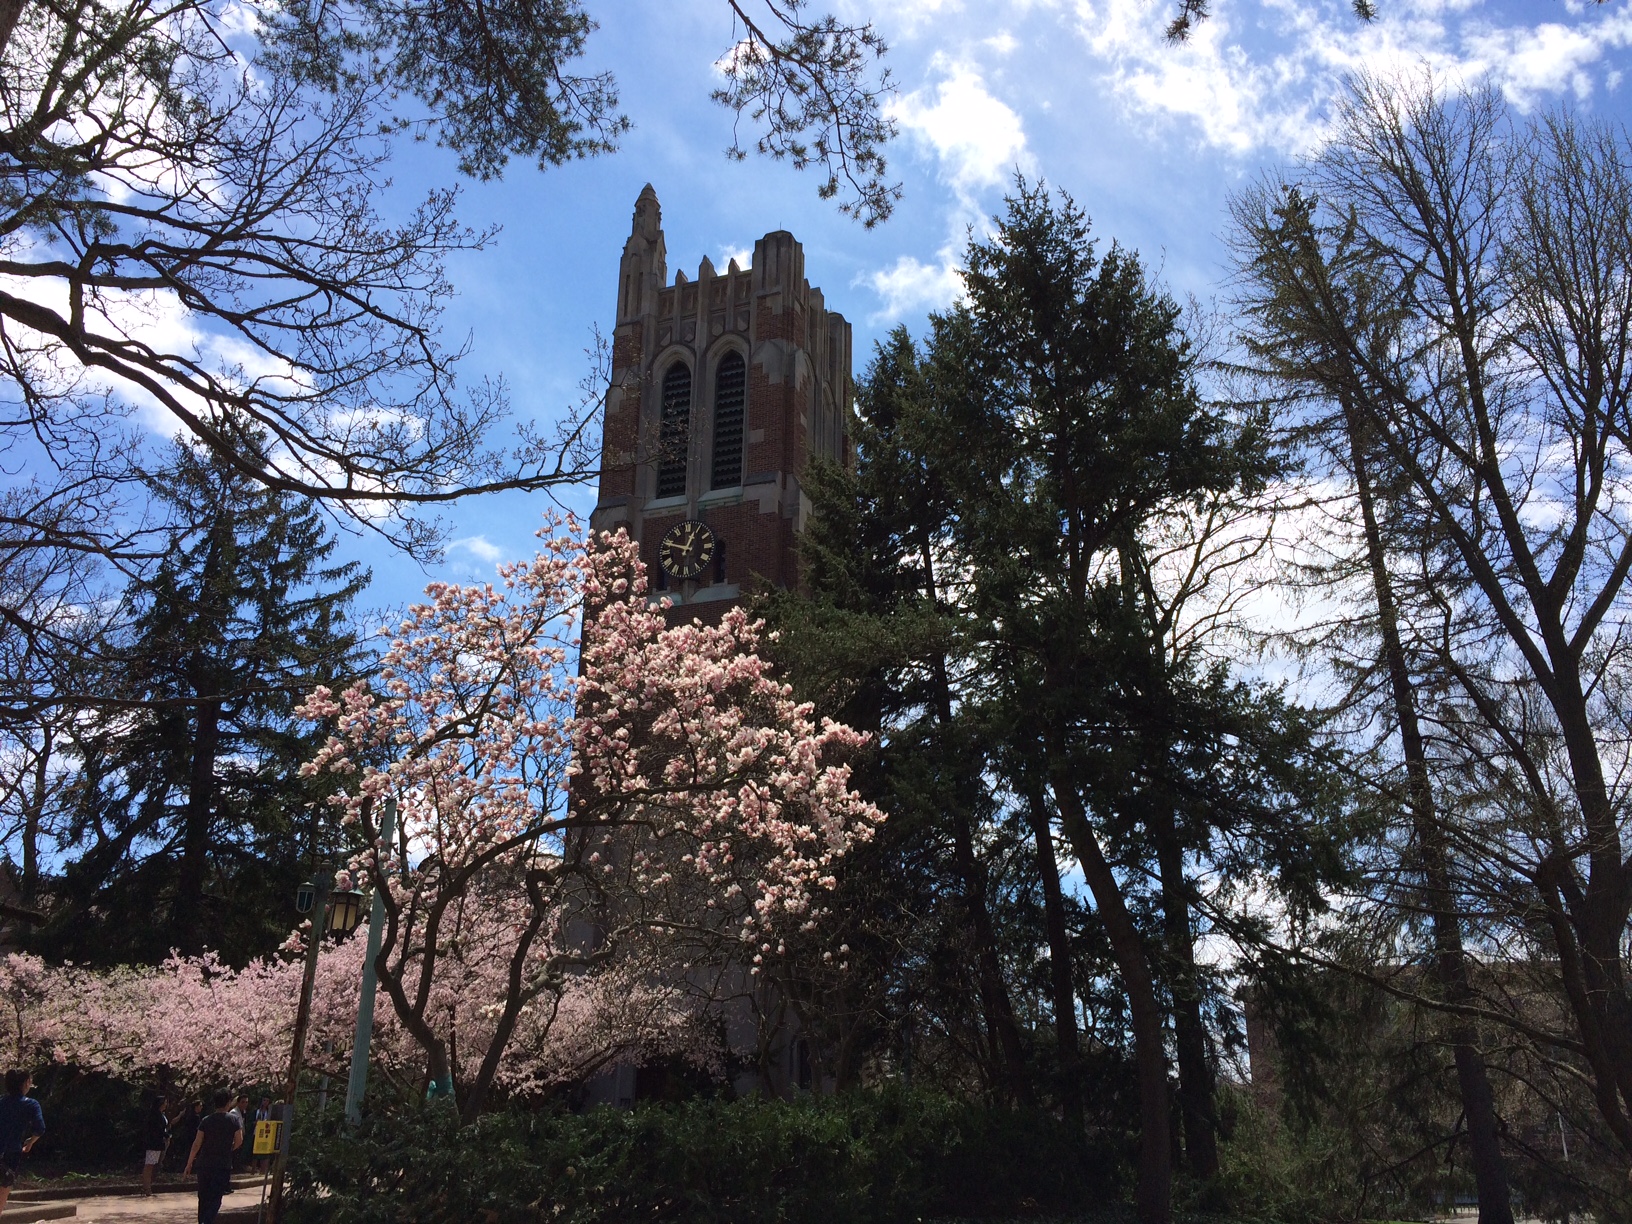 Blossoming trees near Beaumont Tower one May afternoon in 2018.